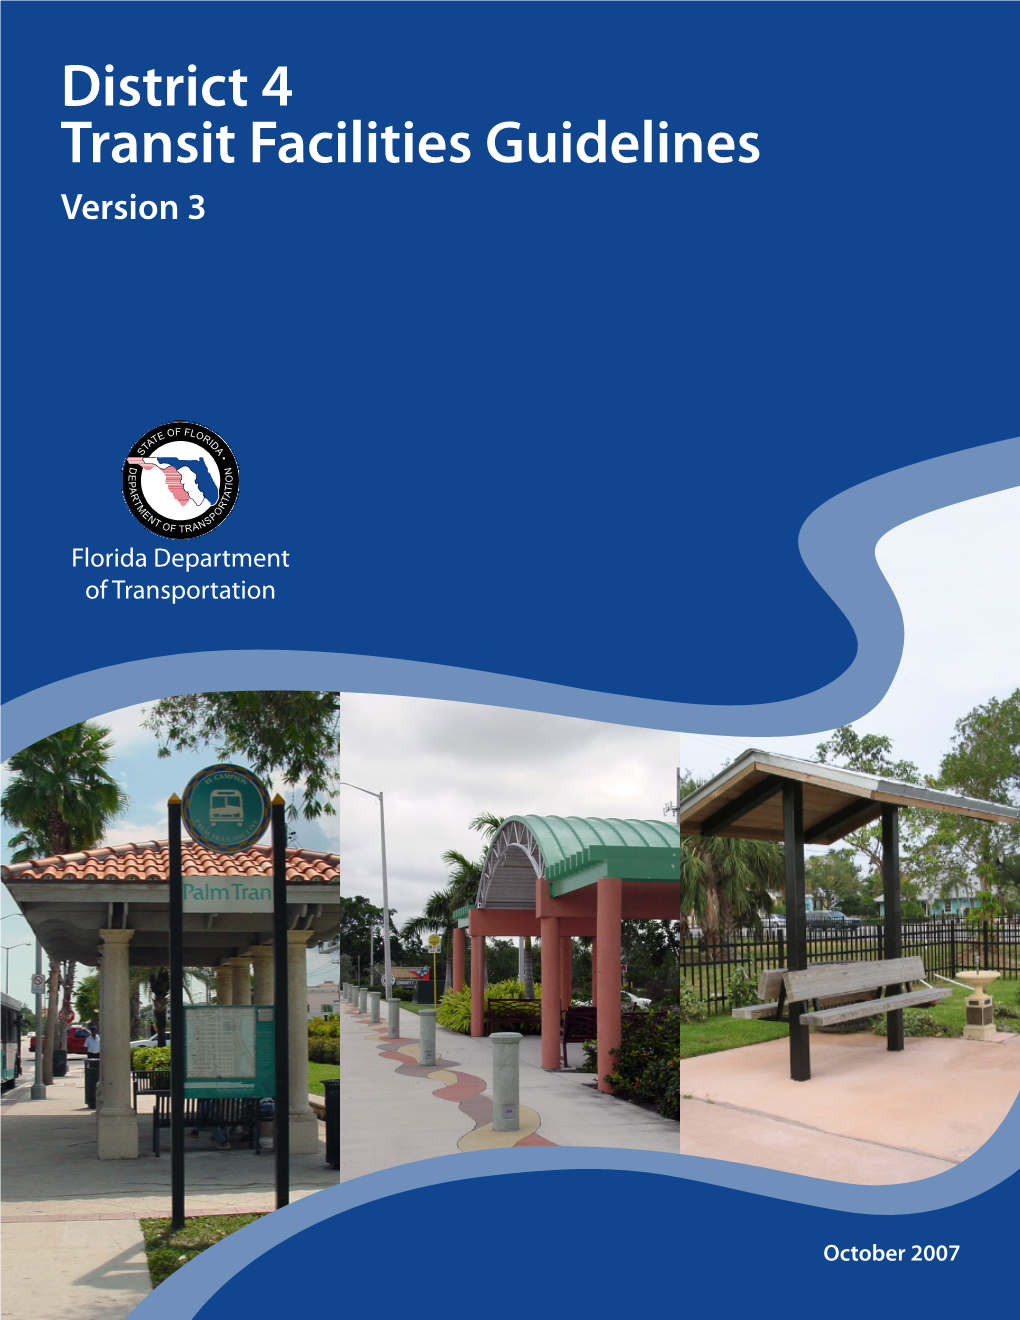 District 4 Transit Facilities Guidelines Version 3